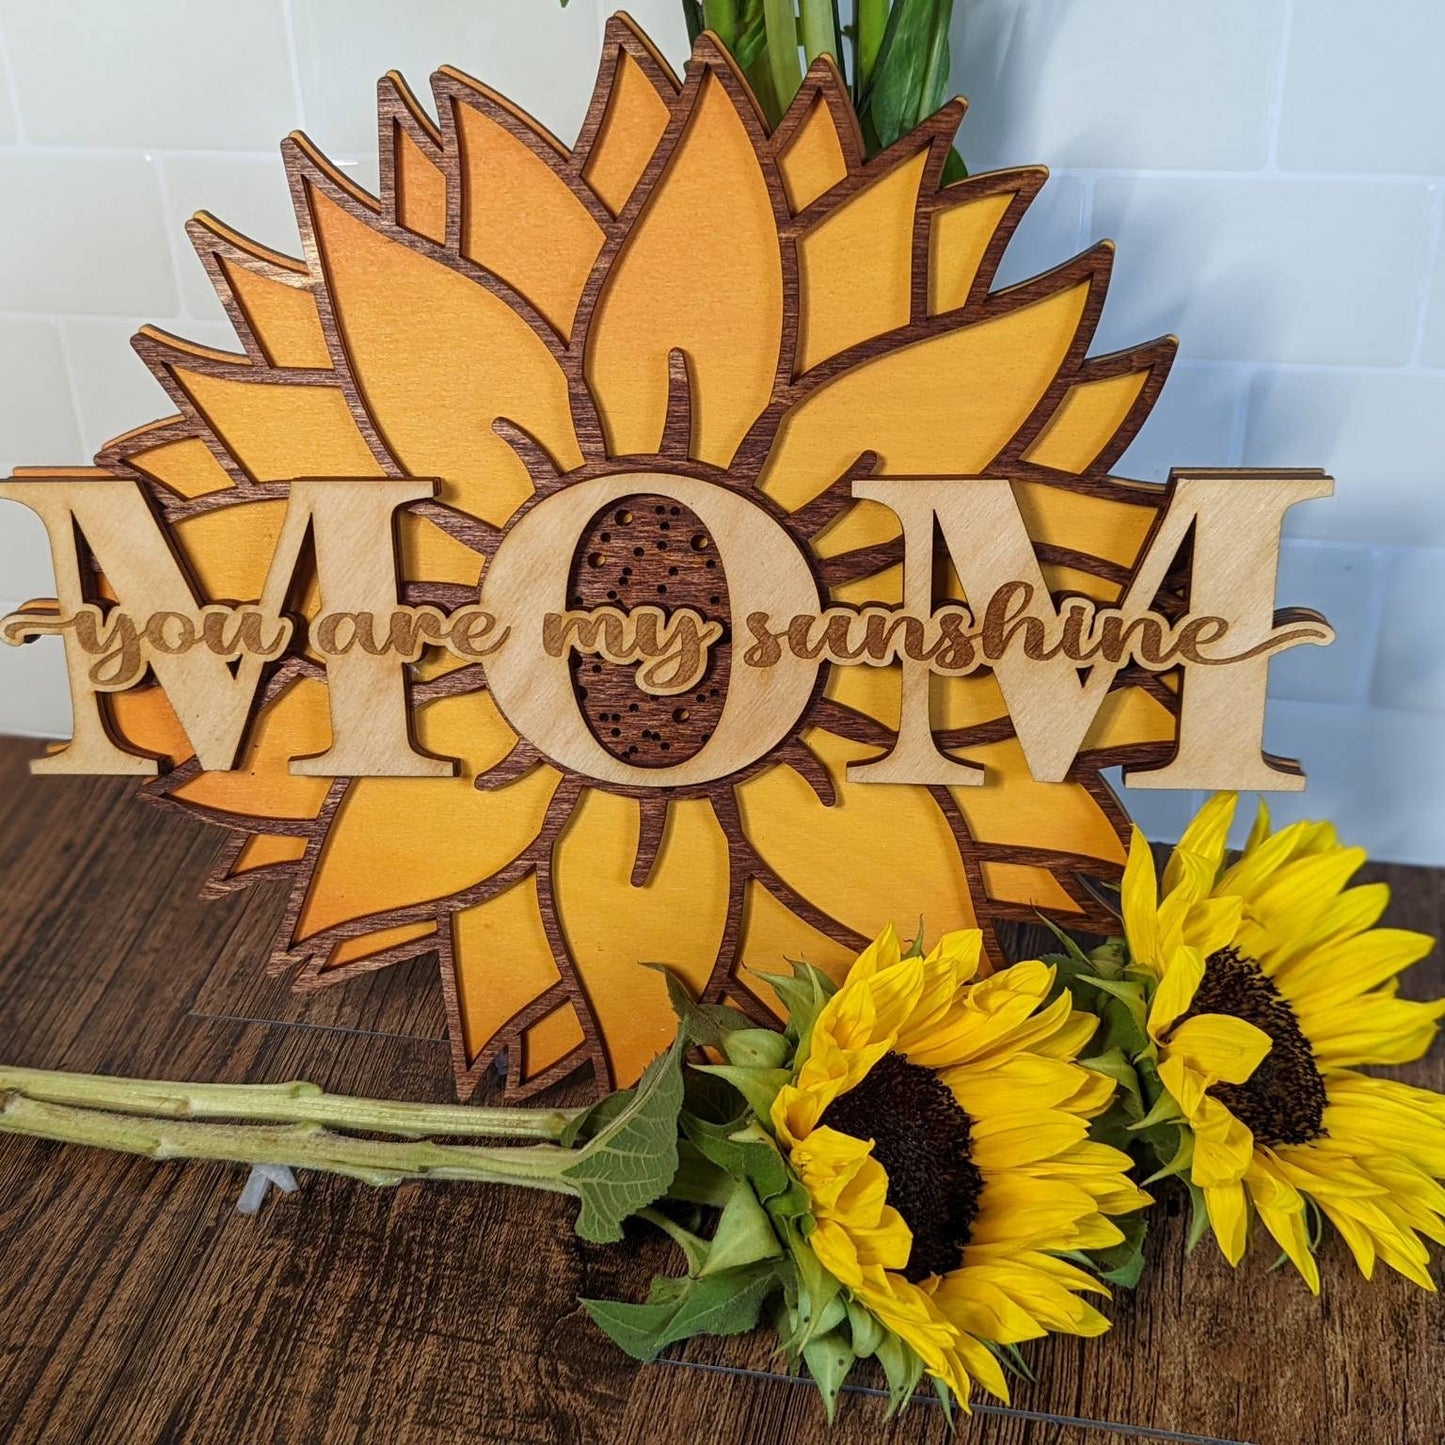 Intricate hand painted wooden sunflower mother's day gift sign. Gift for mom. Garden sign. You are my sunshine